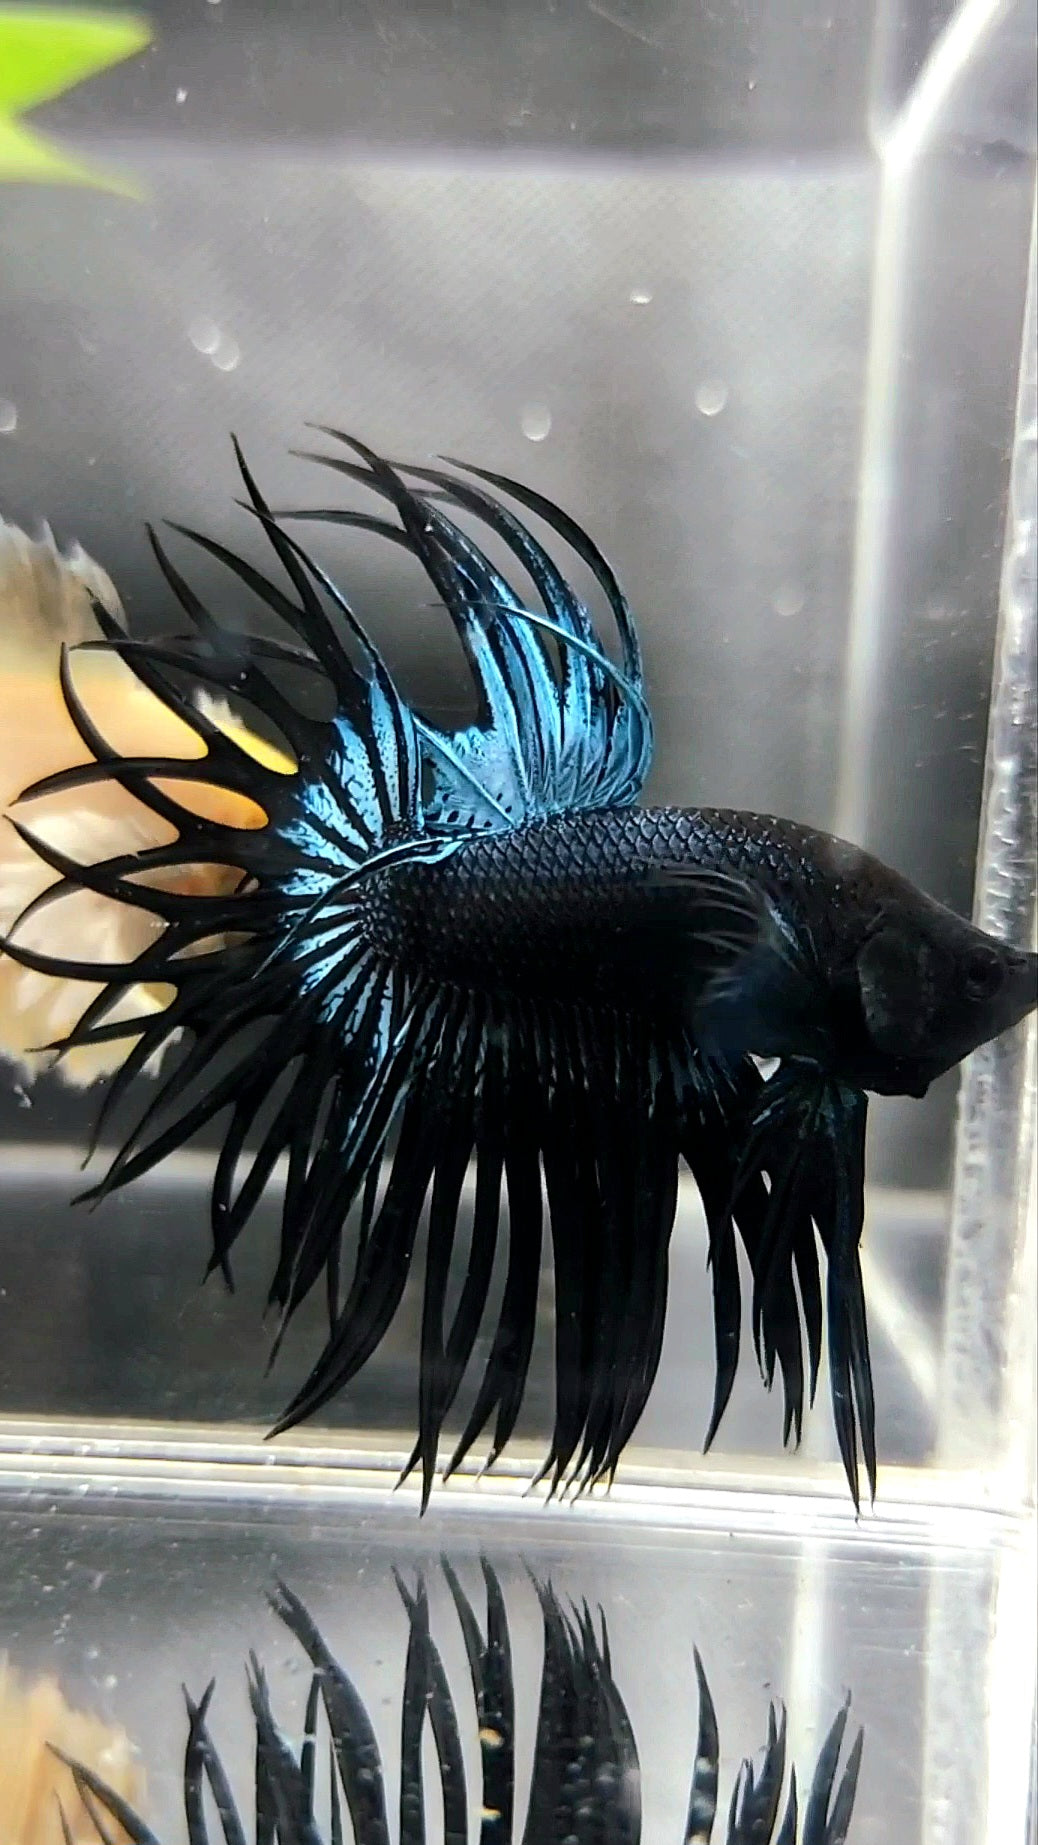 KING CROWNTAIL BLACK ORCHID PREMIUM BETTA FISH